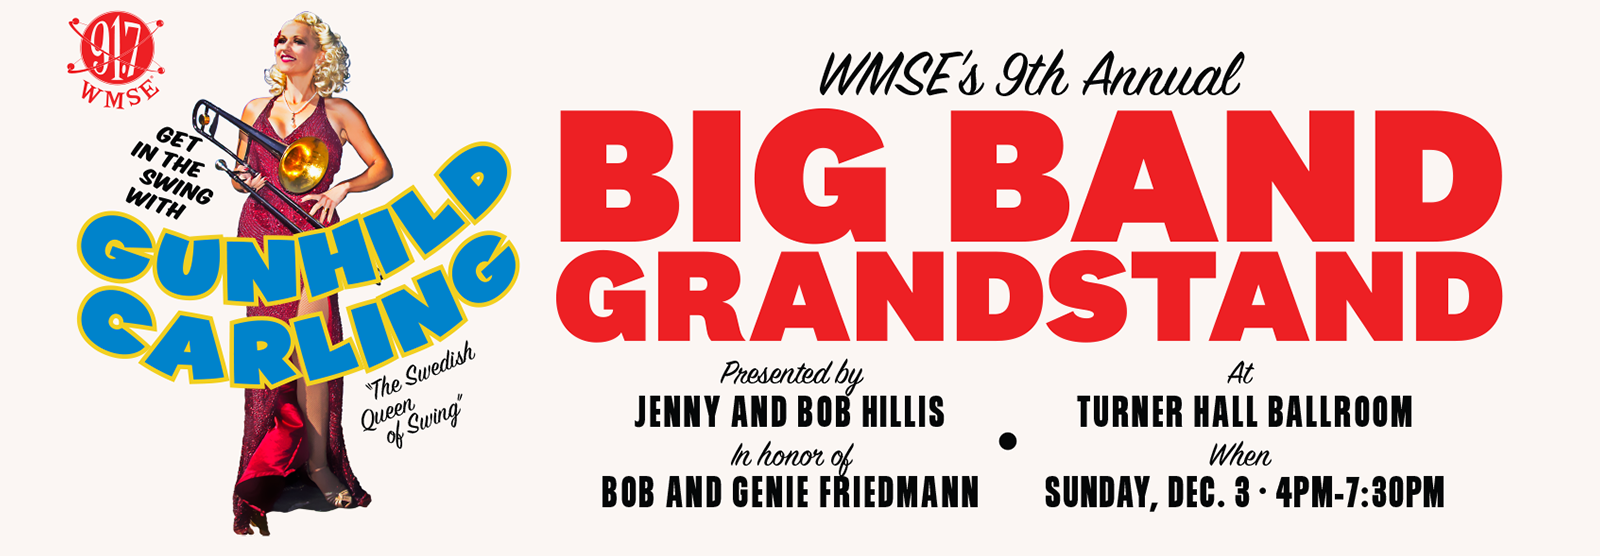 WMSE's 9th Annual Big Band Grandstand